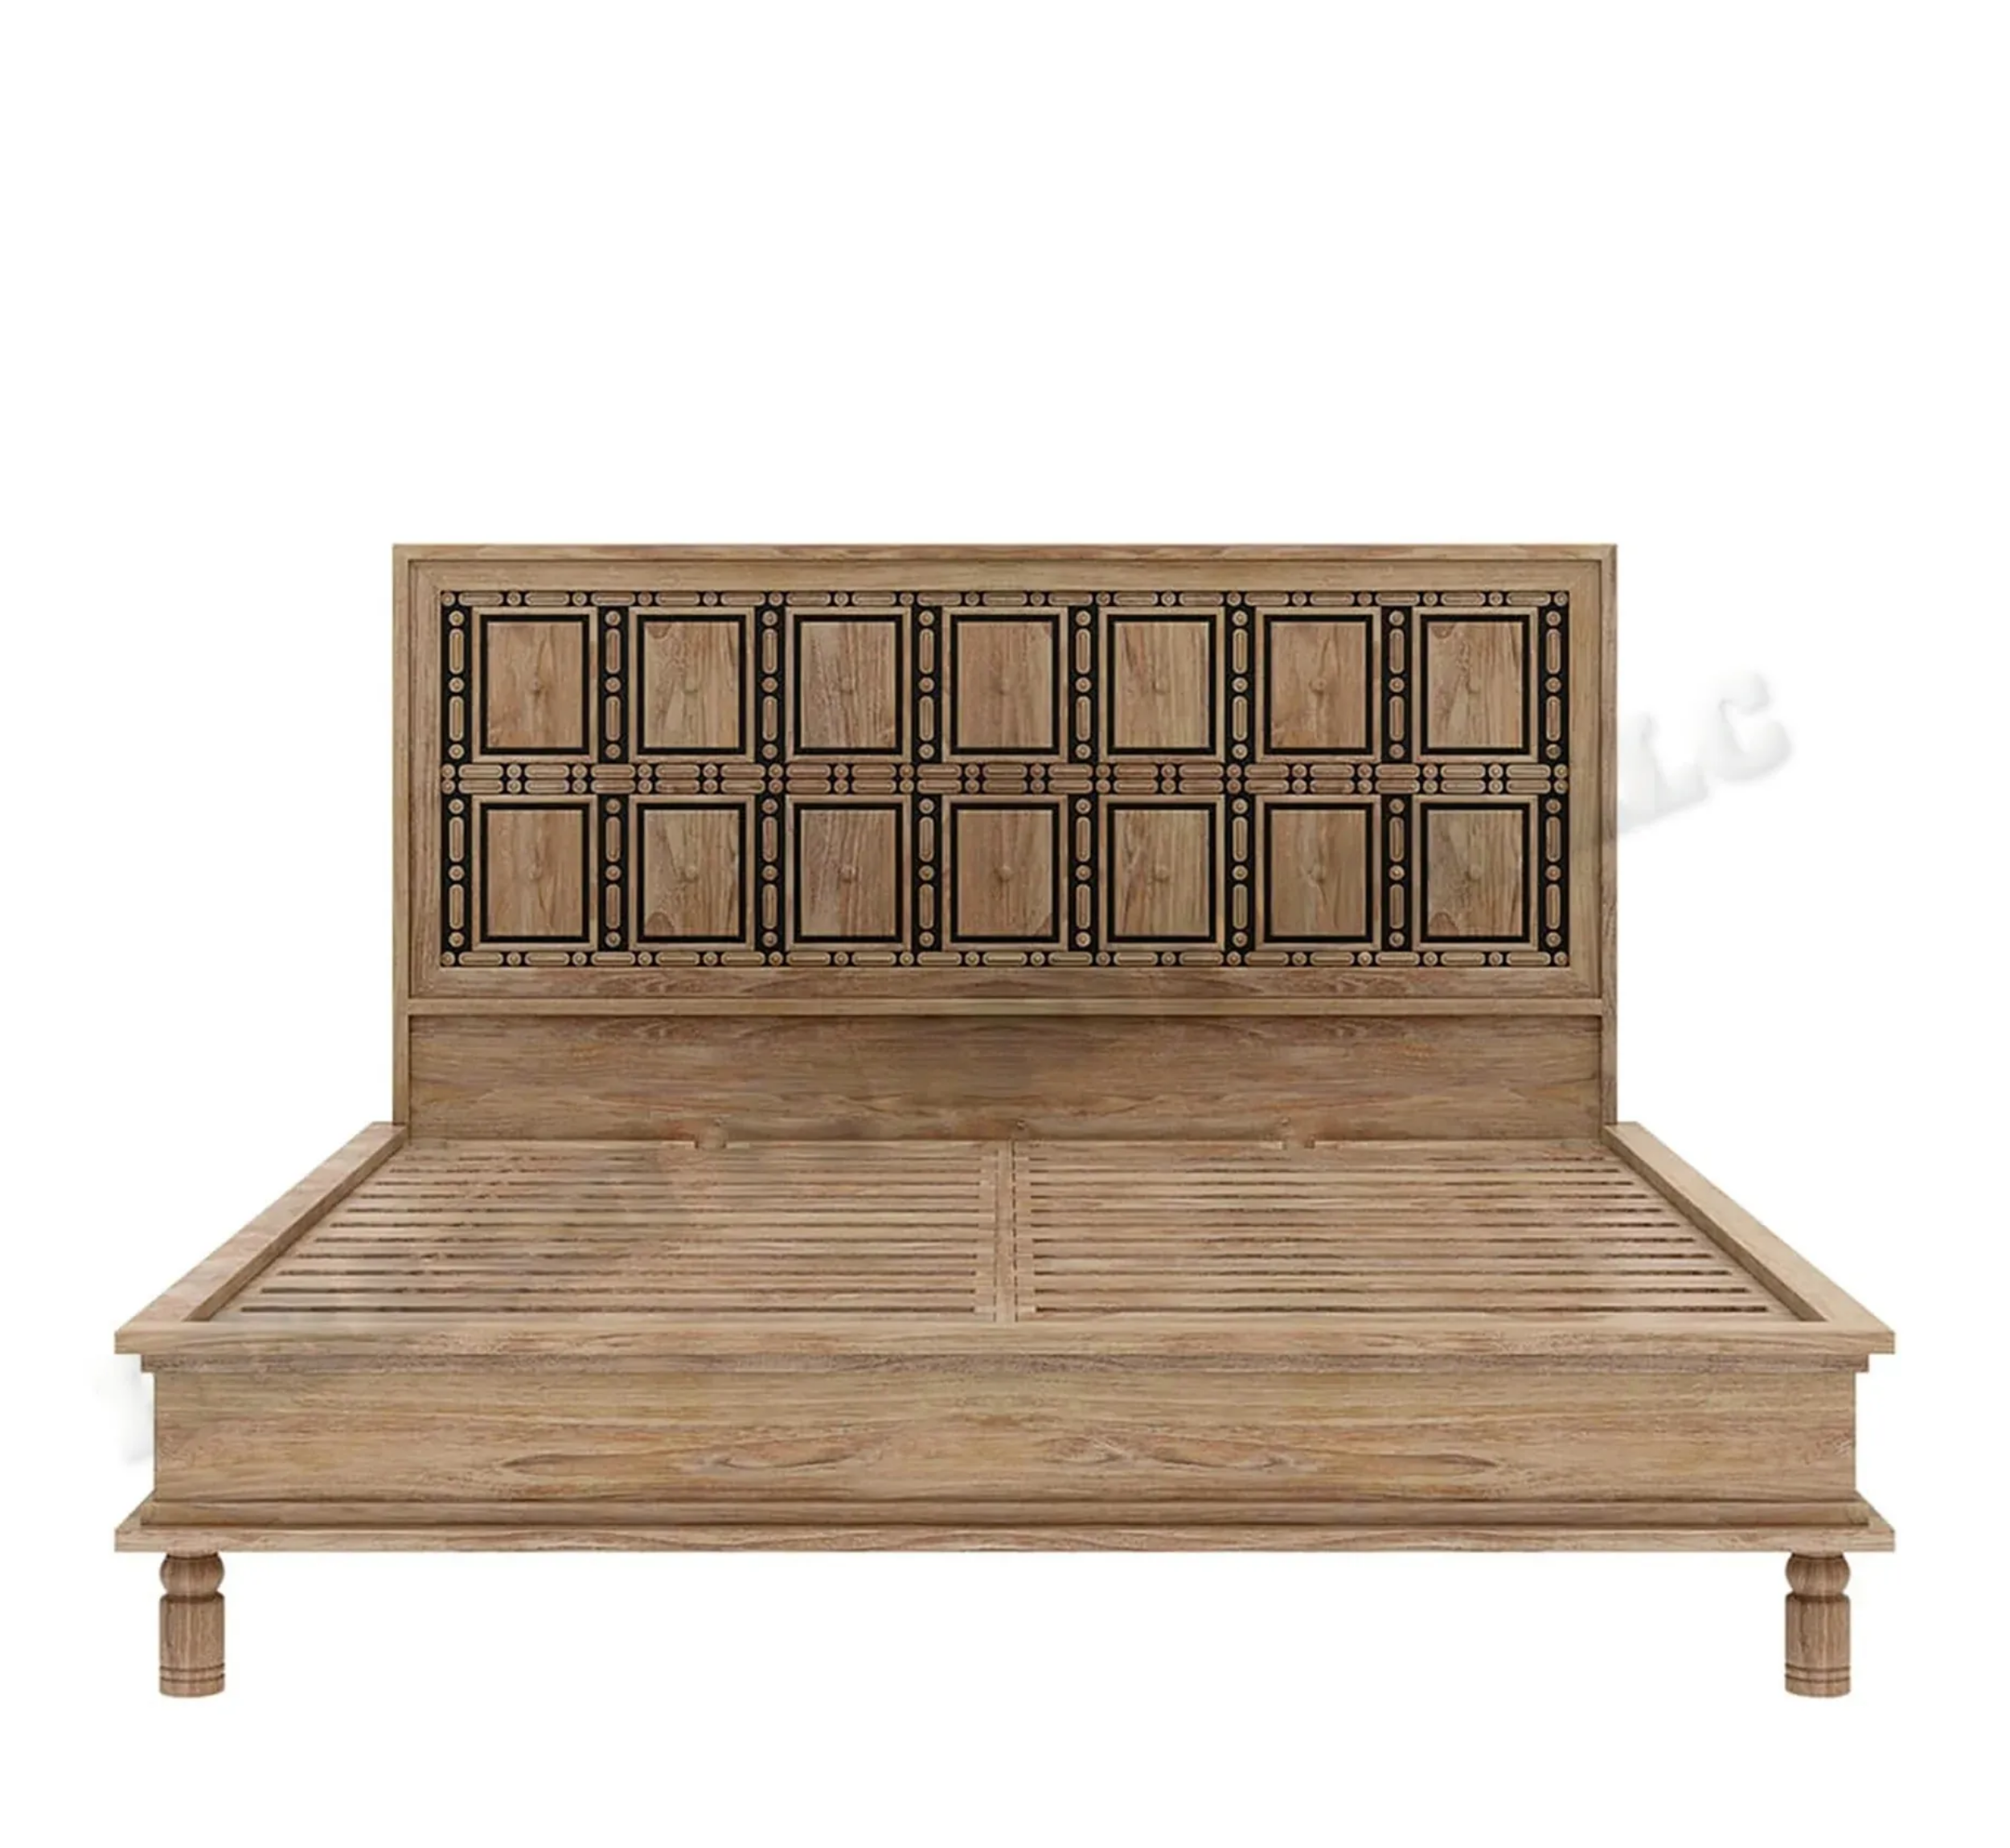 Felicity 100% Solid Wood Bed